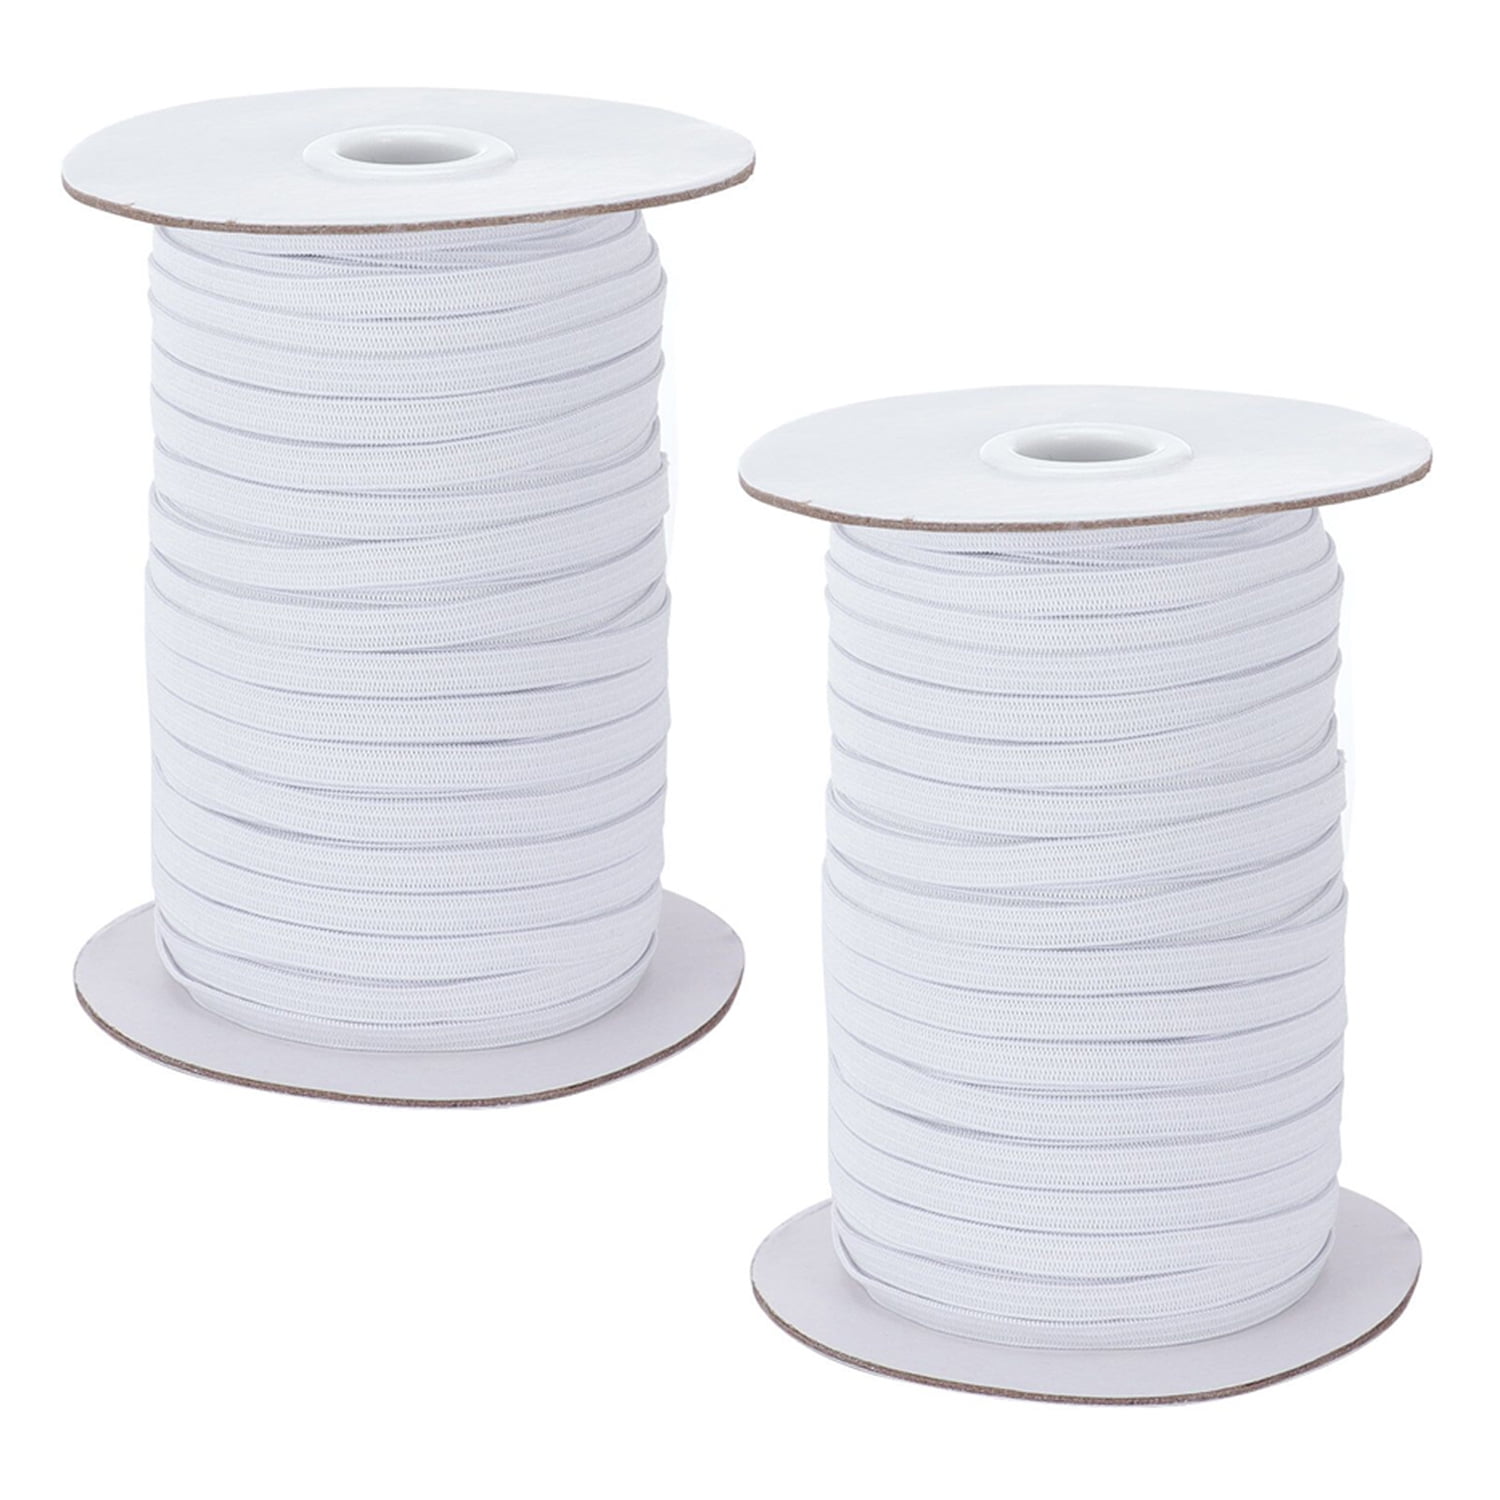 Coopay 45 Yards Length 1/2 Width Elastic Cord Elastic Bands Elastic Rope Heavy Stretch Elastic Spool Knit for Sewing (White, 1/2 inch)